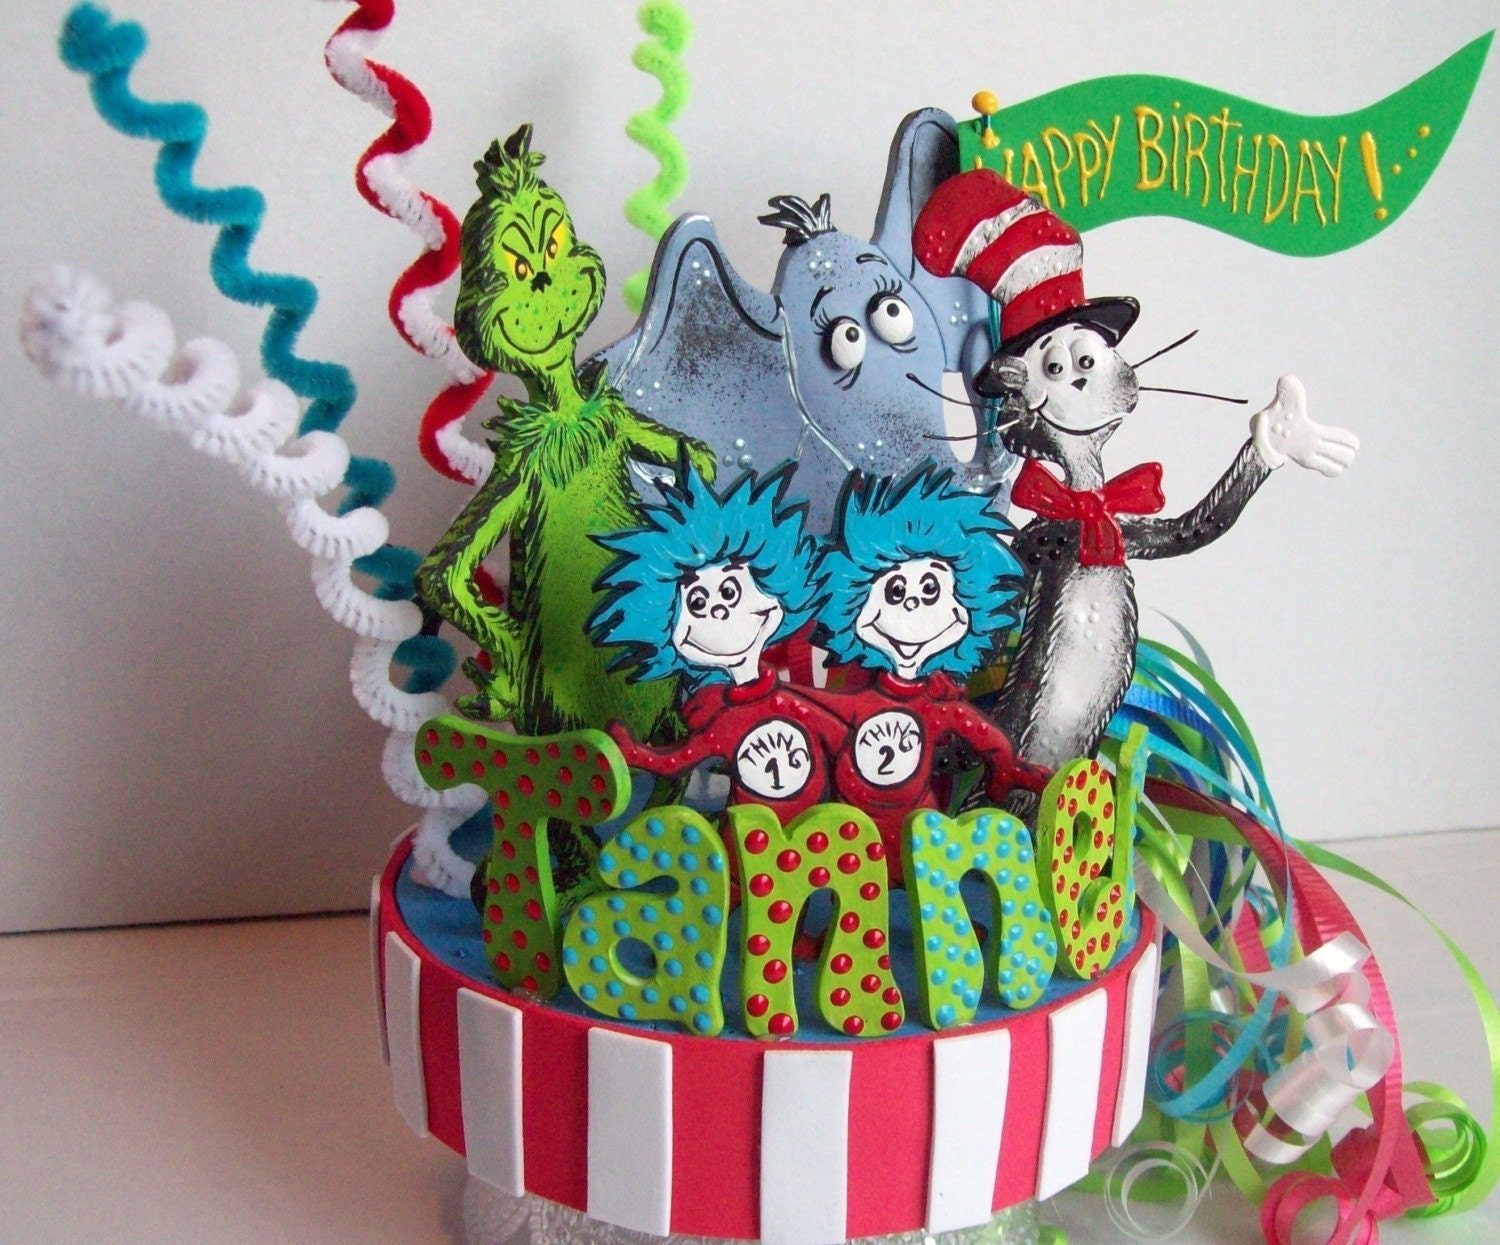 cat in hat cake decorations. SEUSS THEME CAKE TOPPERS OR